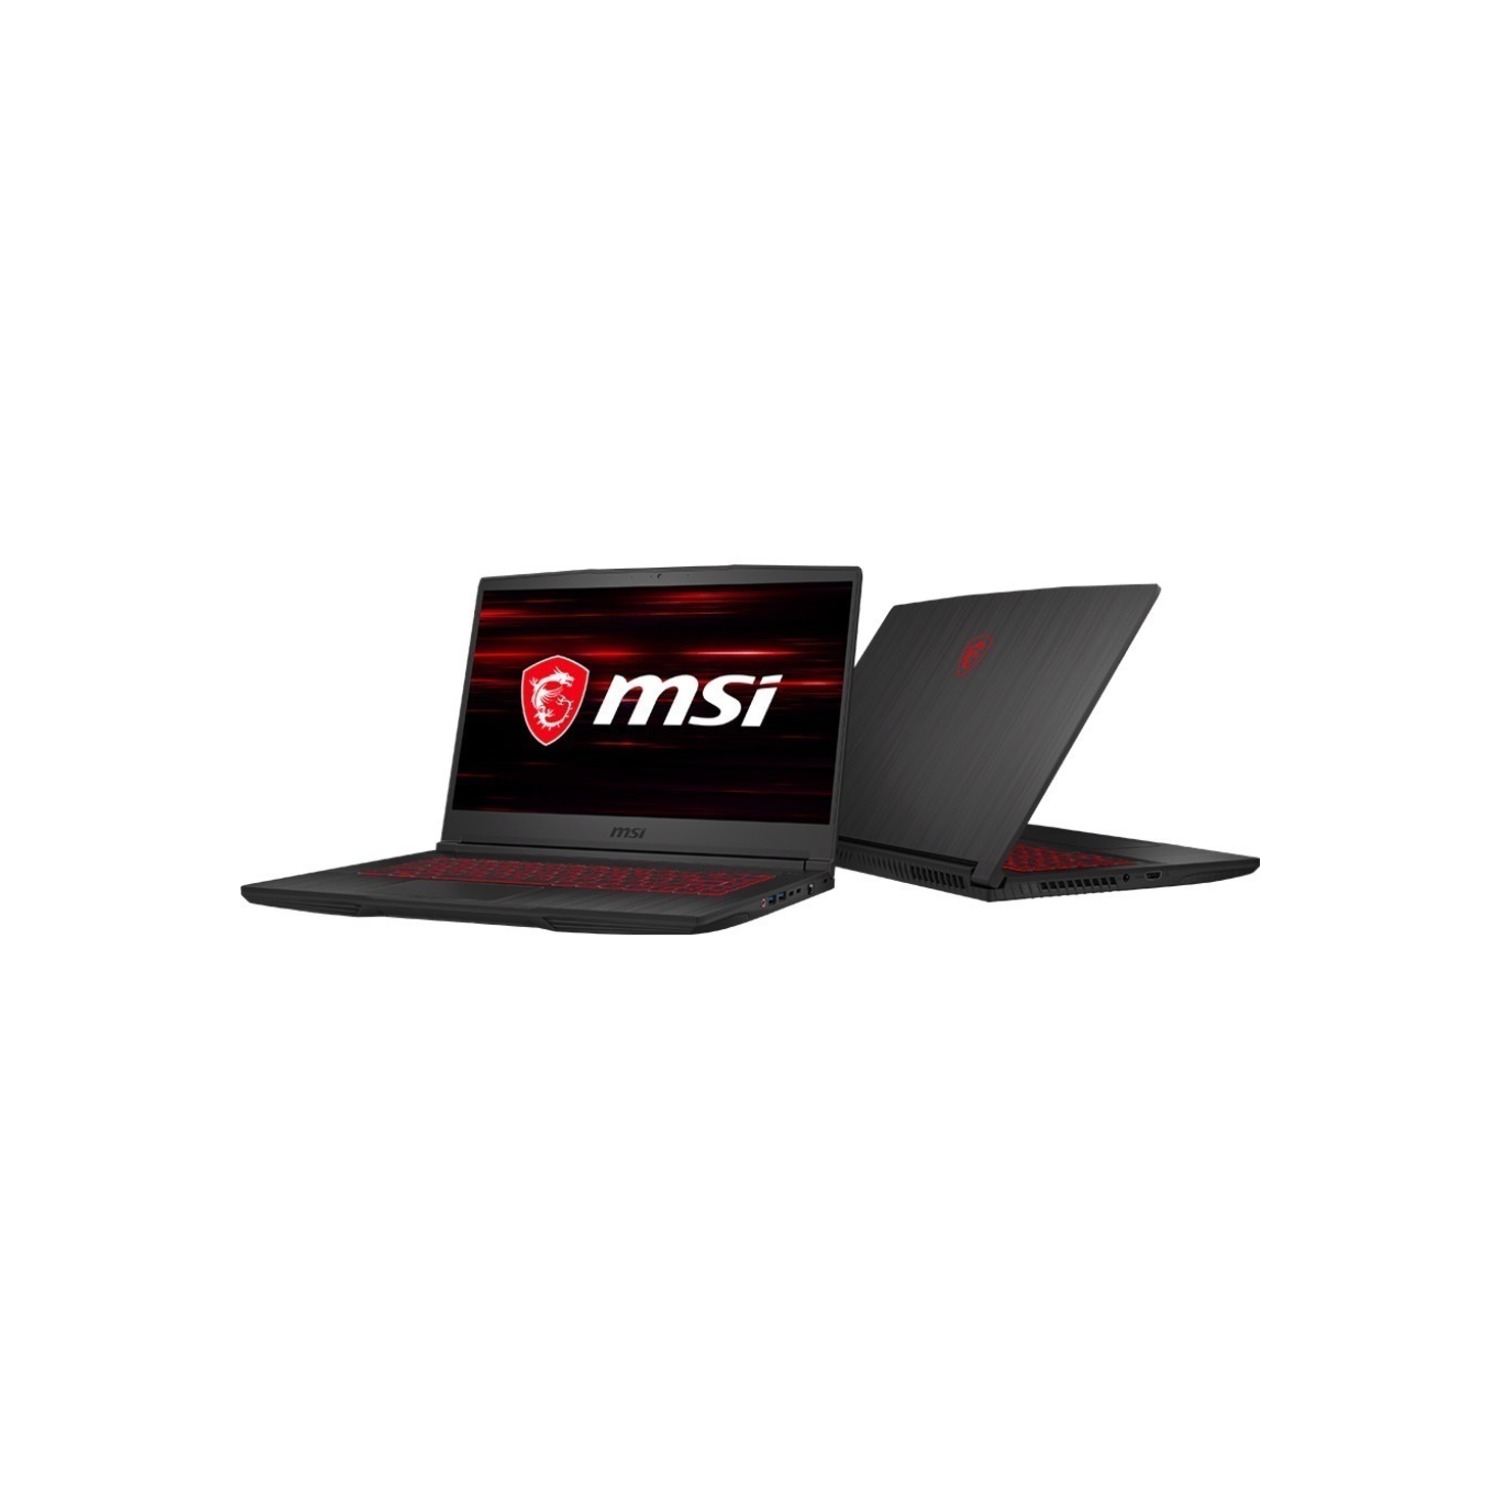 Refurbished(Excellent) - MSI GF65 THIN 15.6" Gaming Notebook Intel i5-10500H 8 GB DDR4 Windows 10 Home